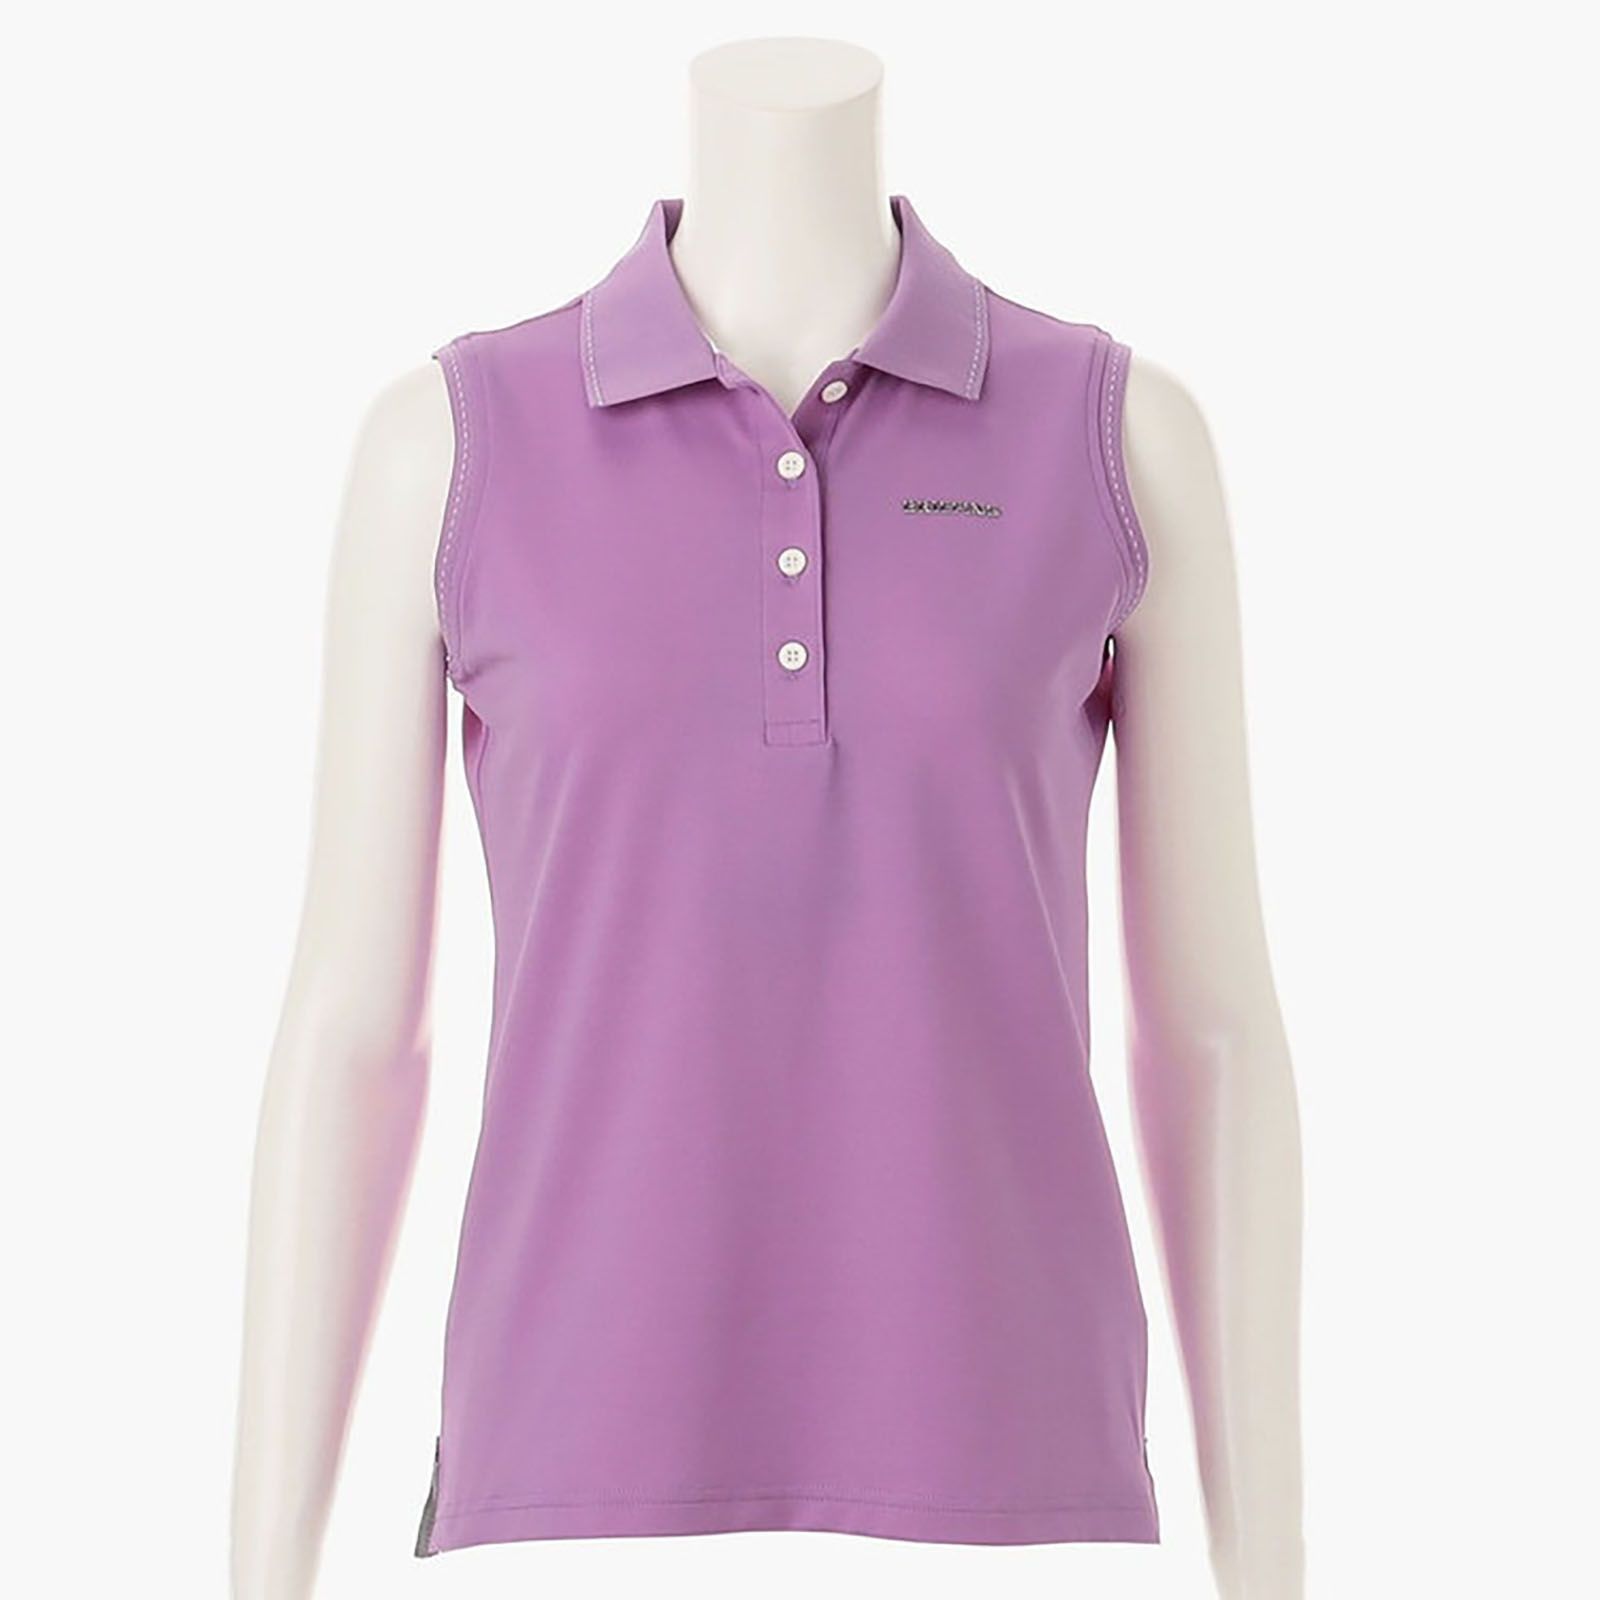 BRIEFING GOLF - WOMENS BASIC NO SLEEVE POLO | ポロシャツ 